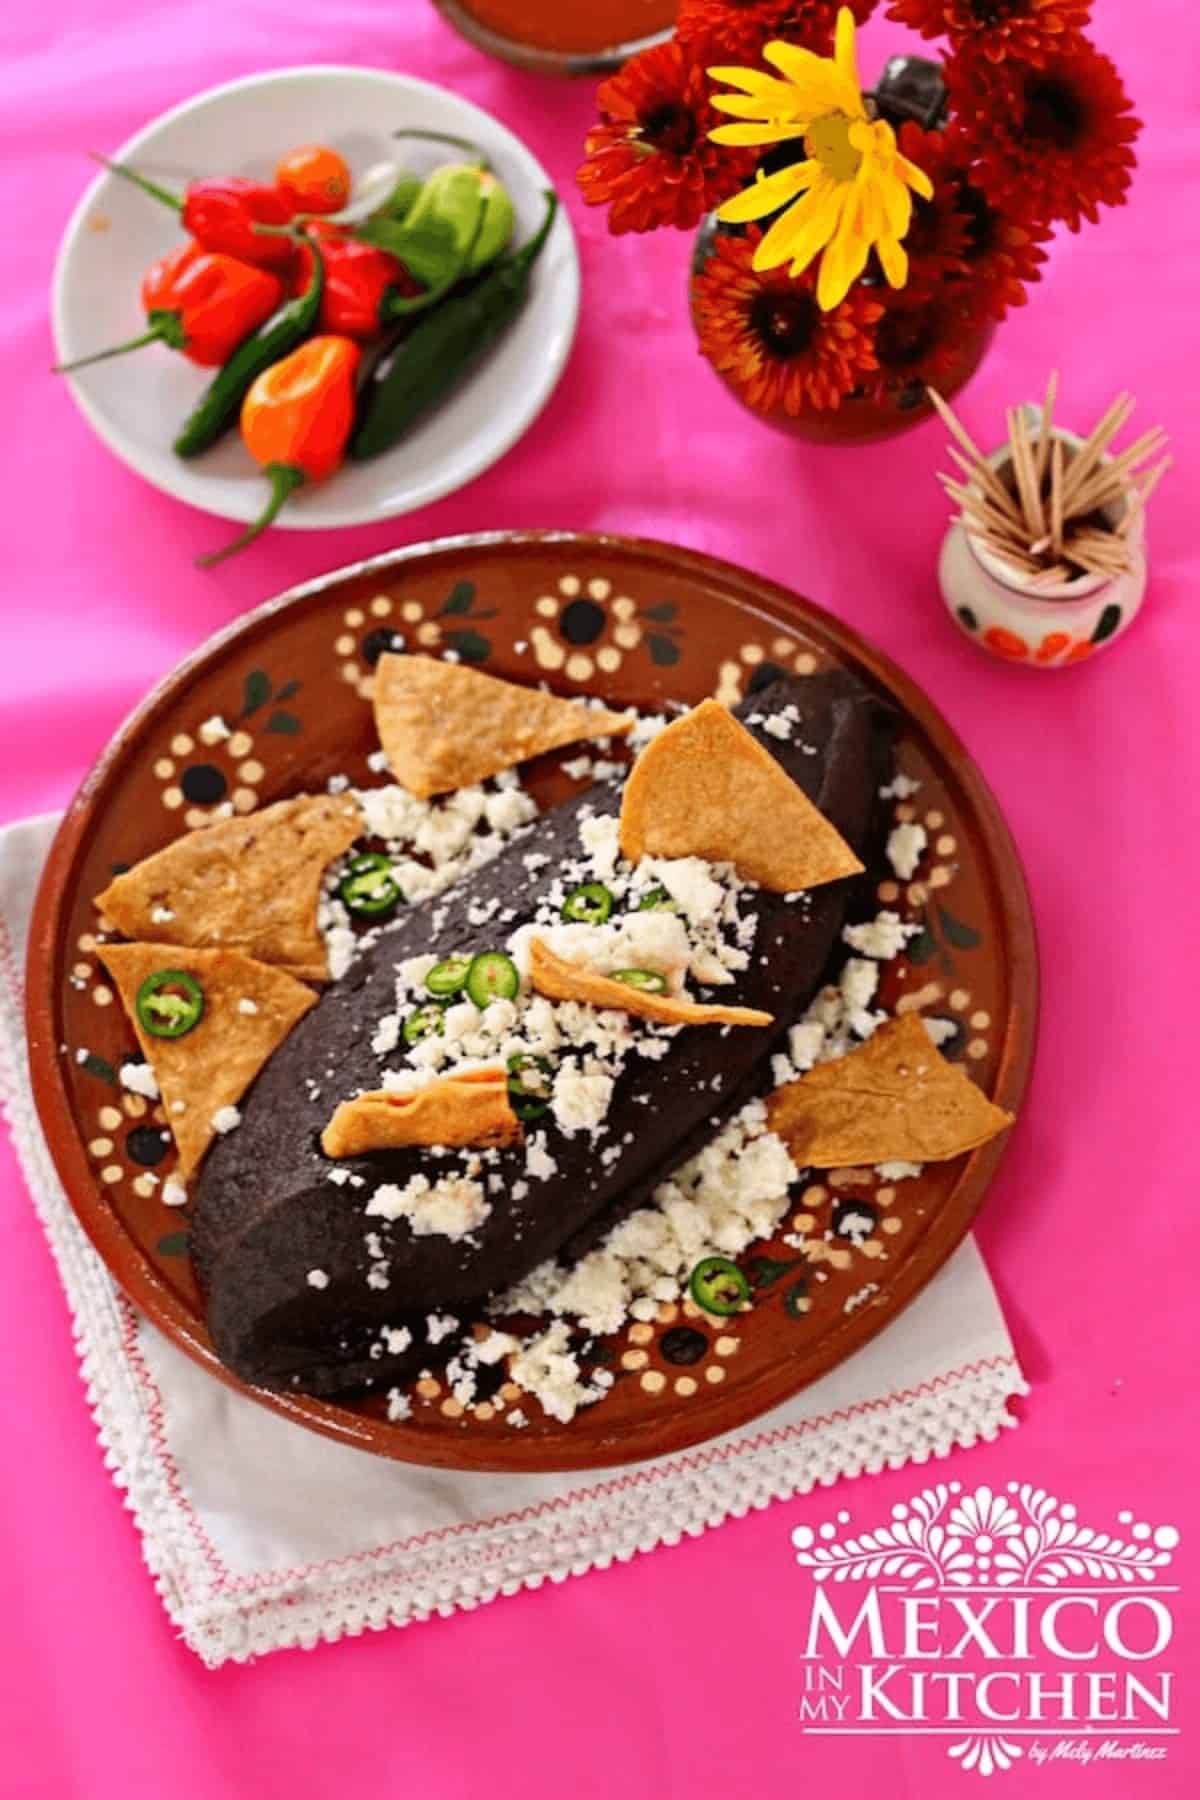 Frijoles refritos (Black refried beans) topped with jalapeños, queso fresco and tortilla chips.